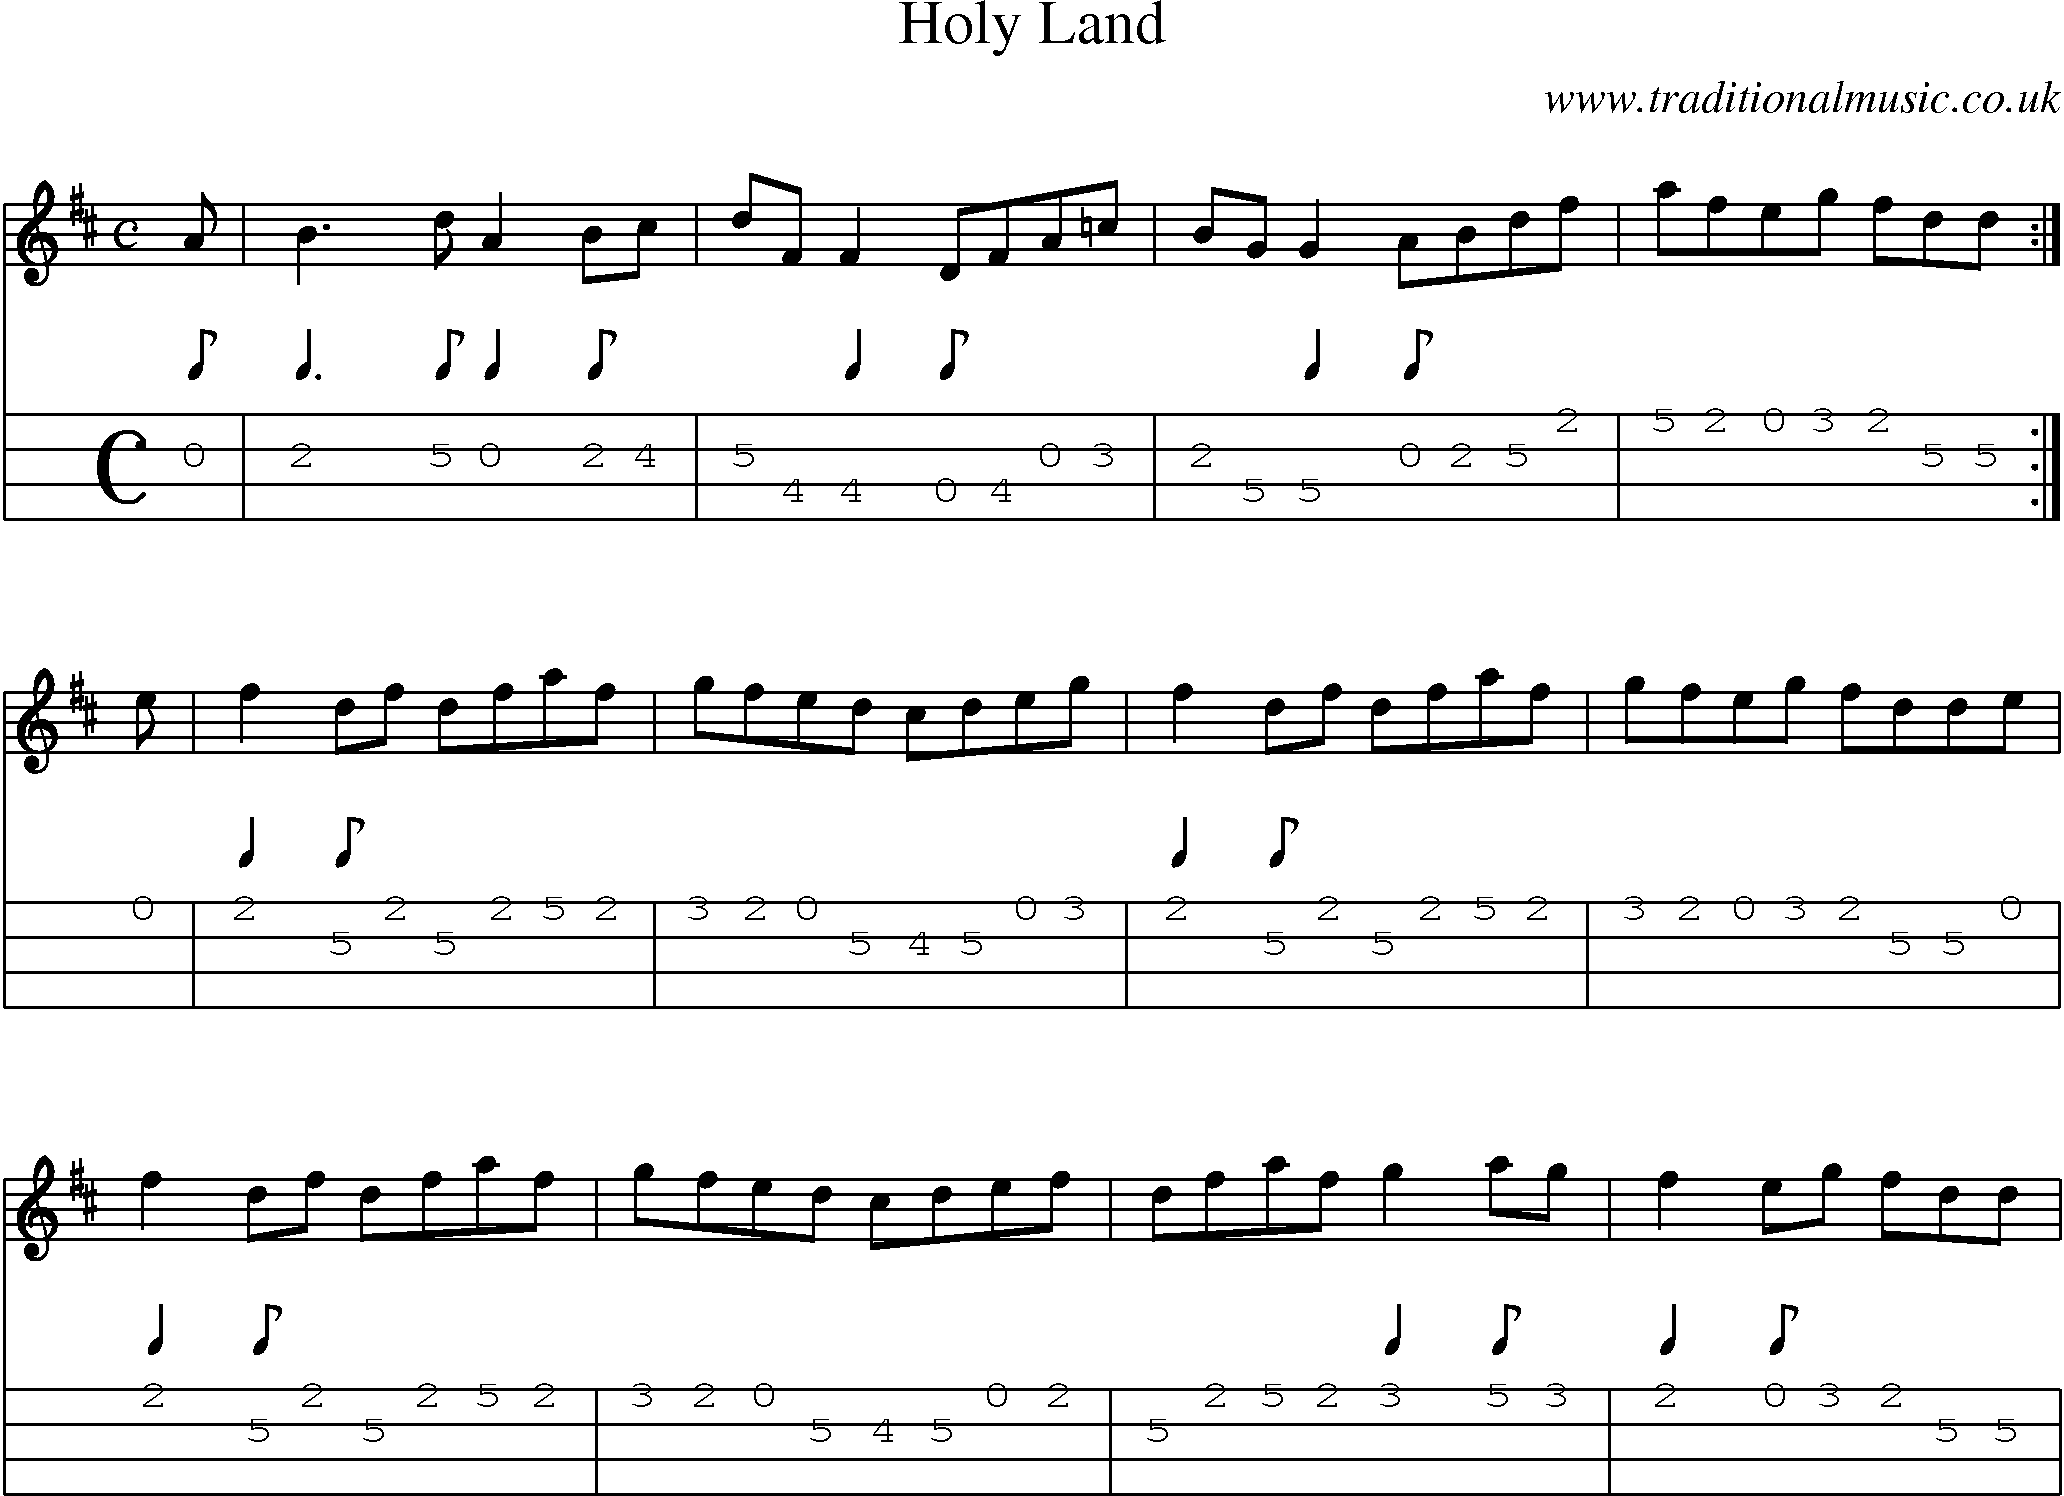 Music Score and Mandolin Tabs for Holy Land